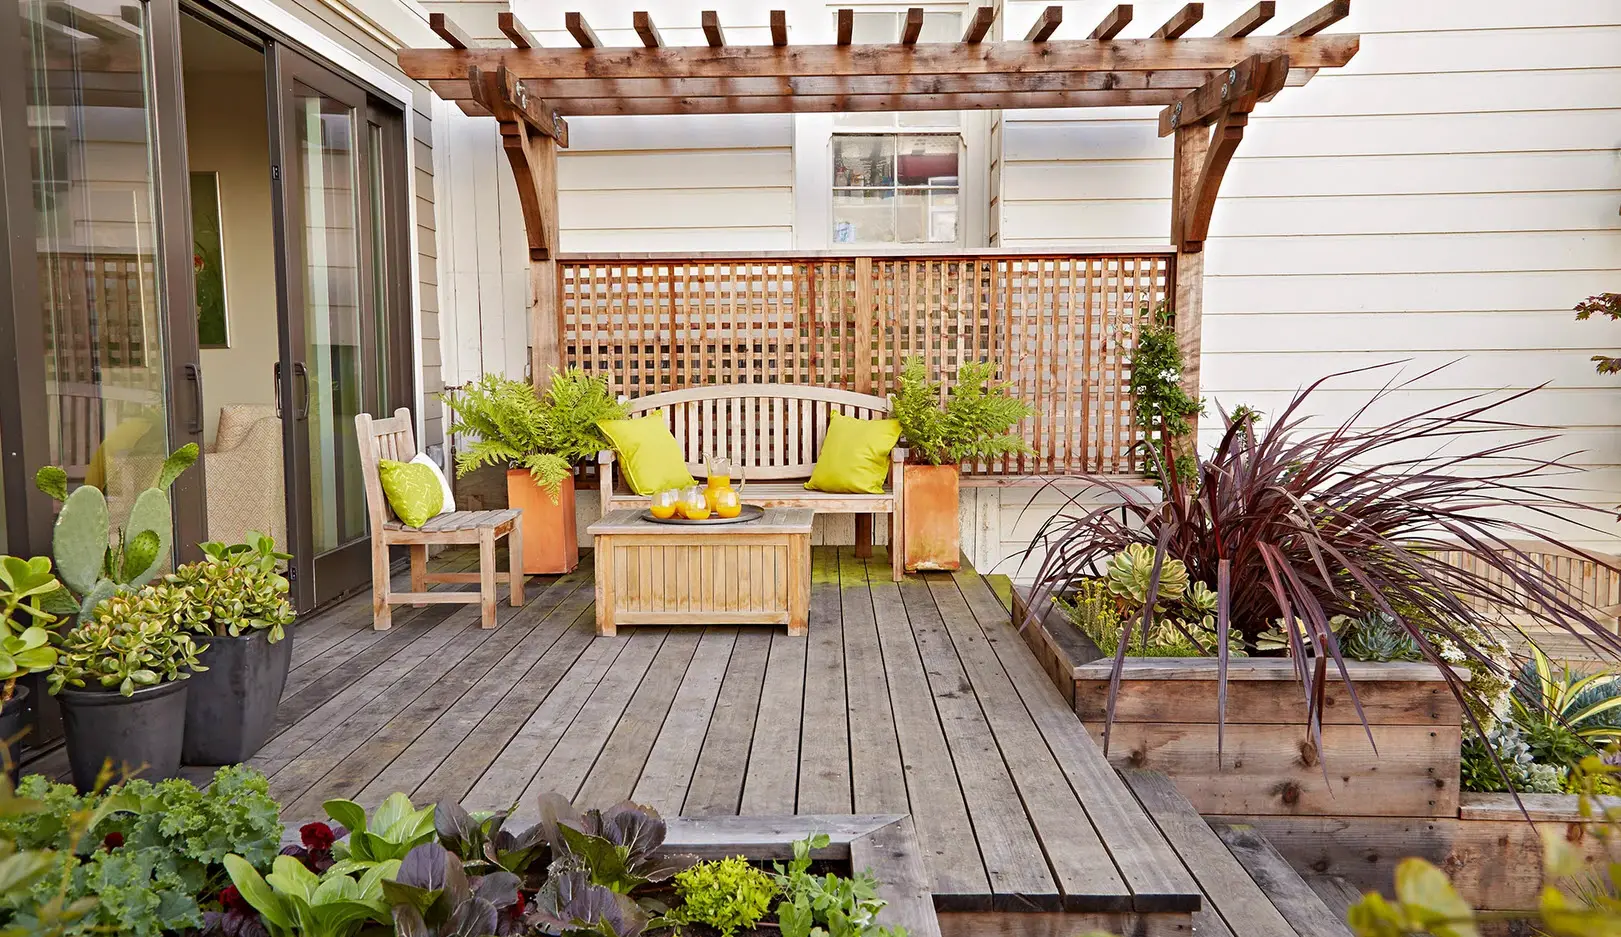 landscaping ideas for small backyard